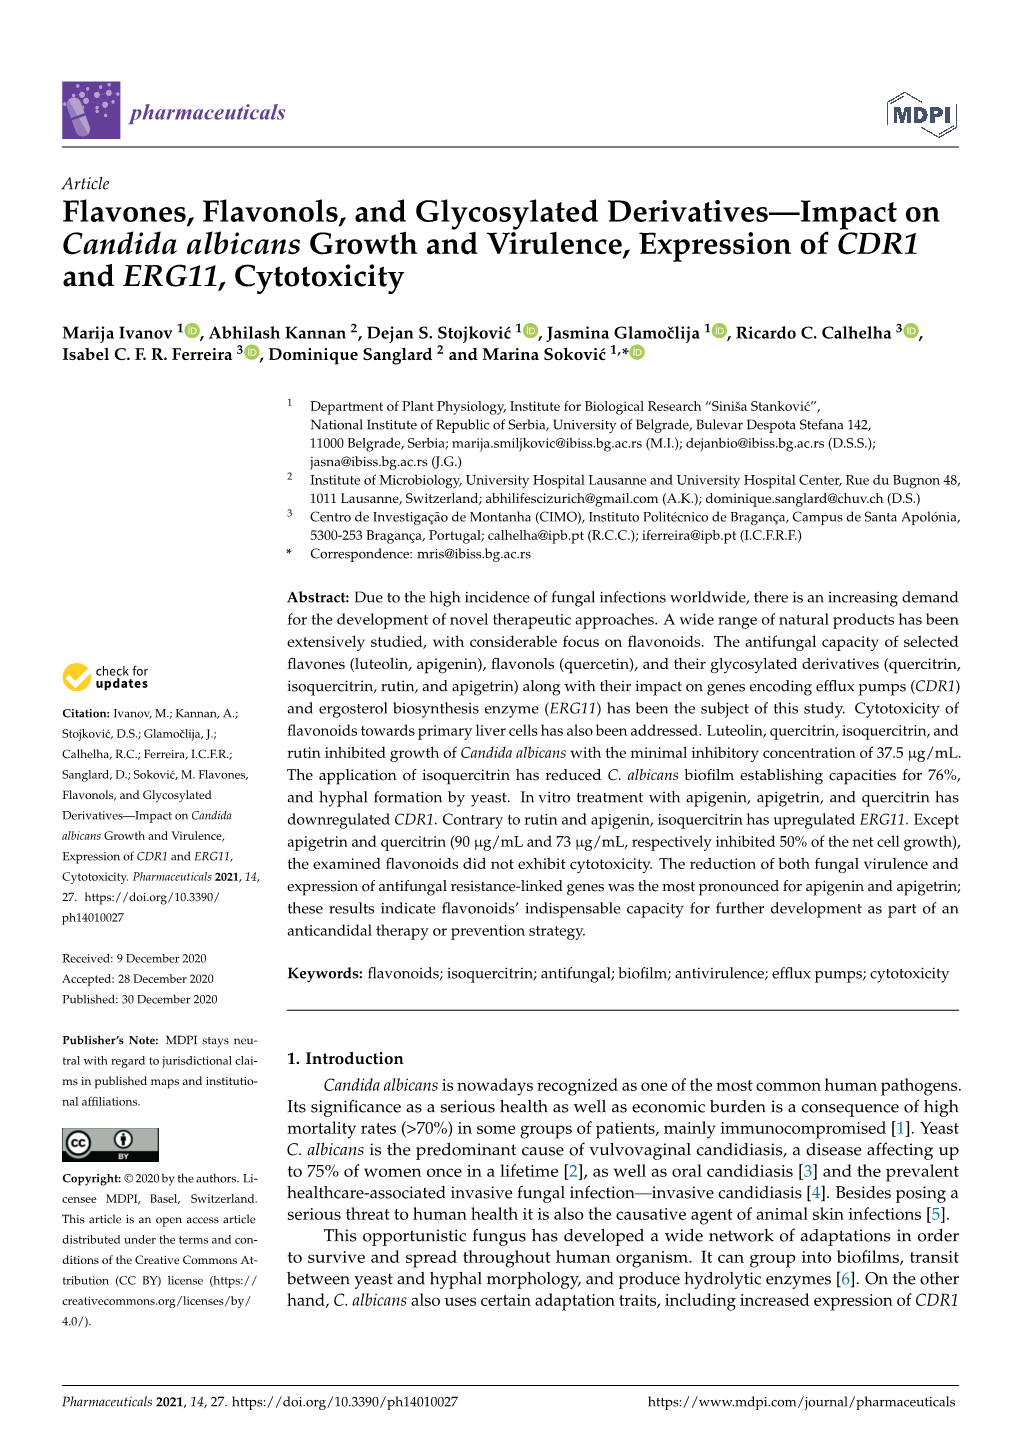 Flavones, Flavonols, and Glycosylated Derivatives—Impact on Candida Albicans Growth and Virulence, Expression of CDR1 and ERG11, Cytotoxicity